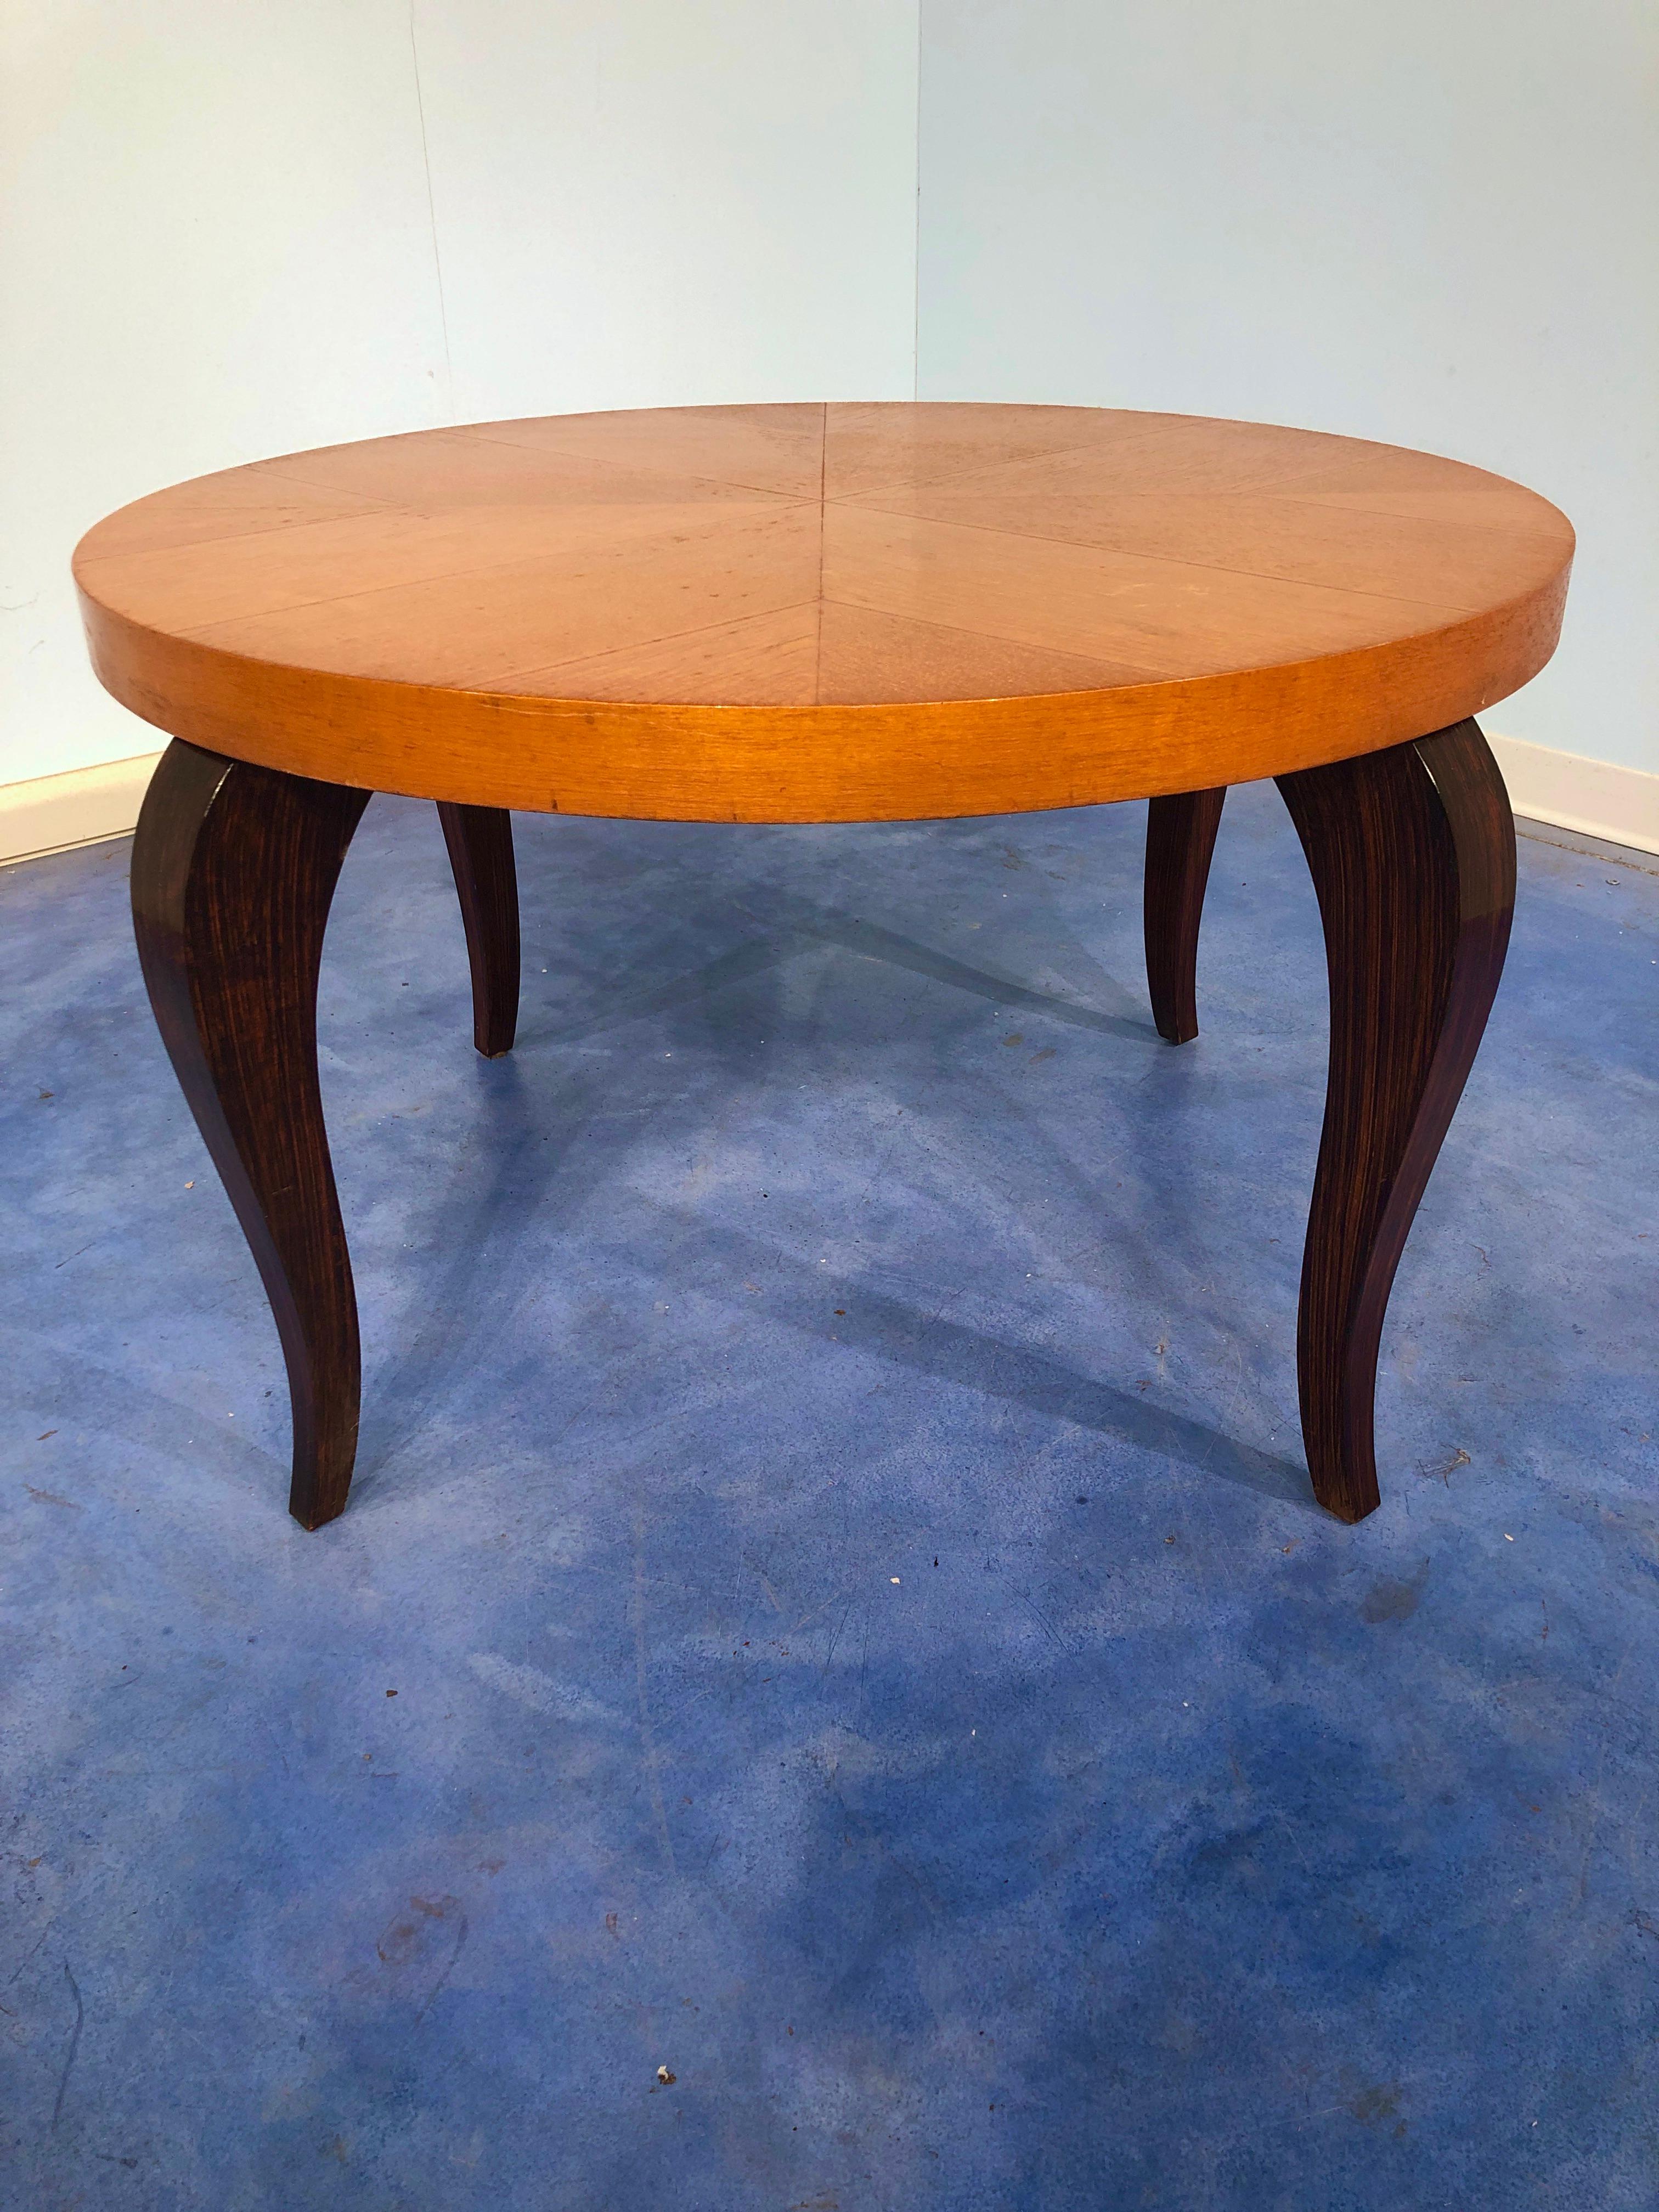 Simple but really beautiful French Art Deco coffee table, 1940.
It has a maple top and stylish legs that give a very elegant touch to the table.
You can see from the pictures the pattern on the top changes from different visual perspectives. 
 